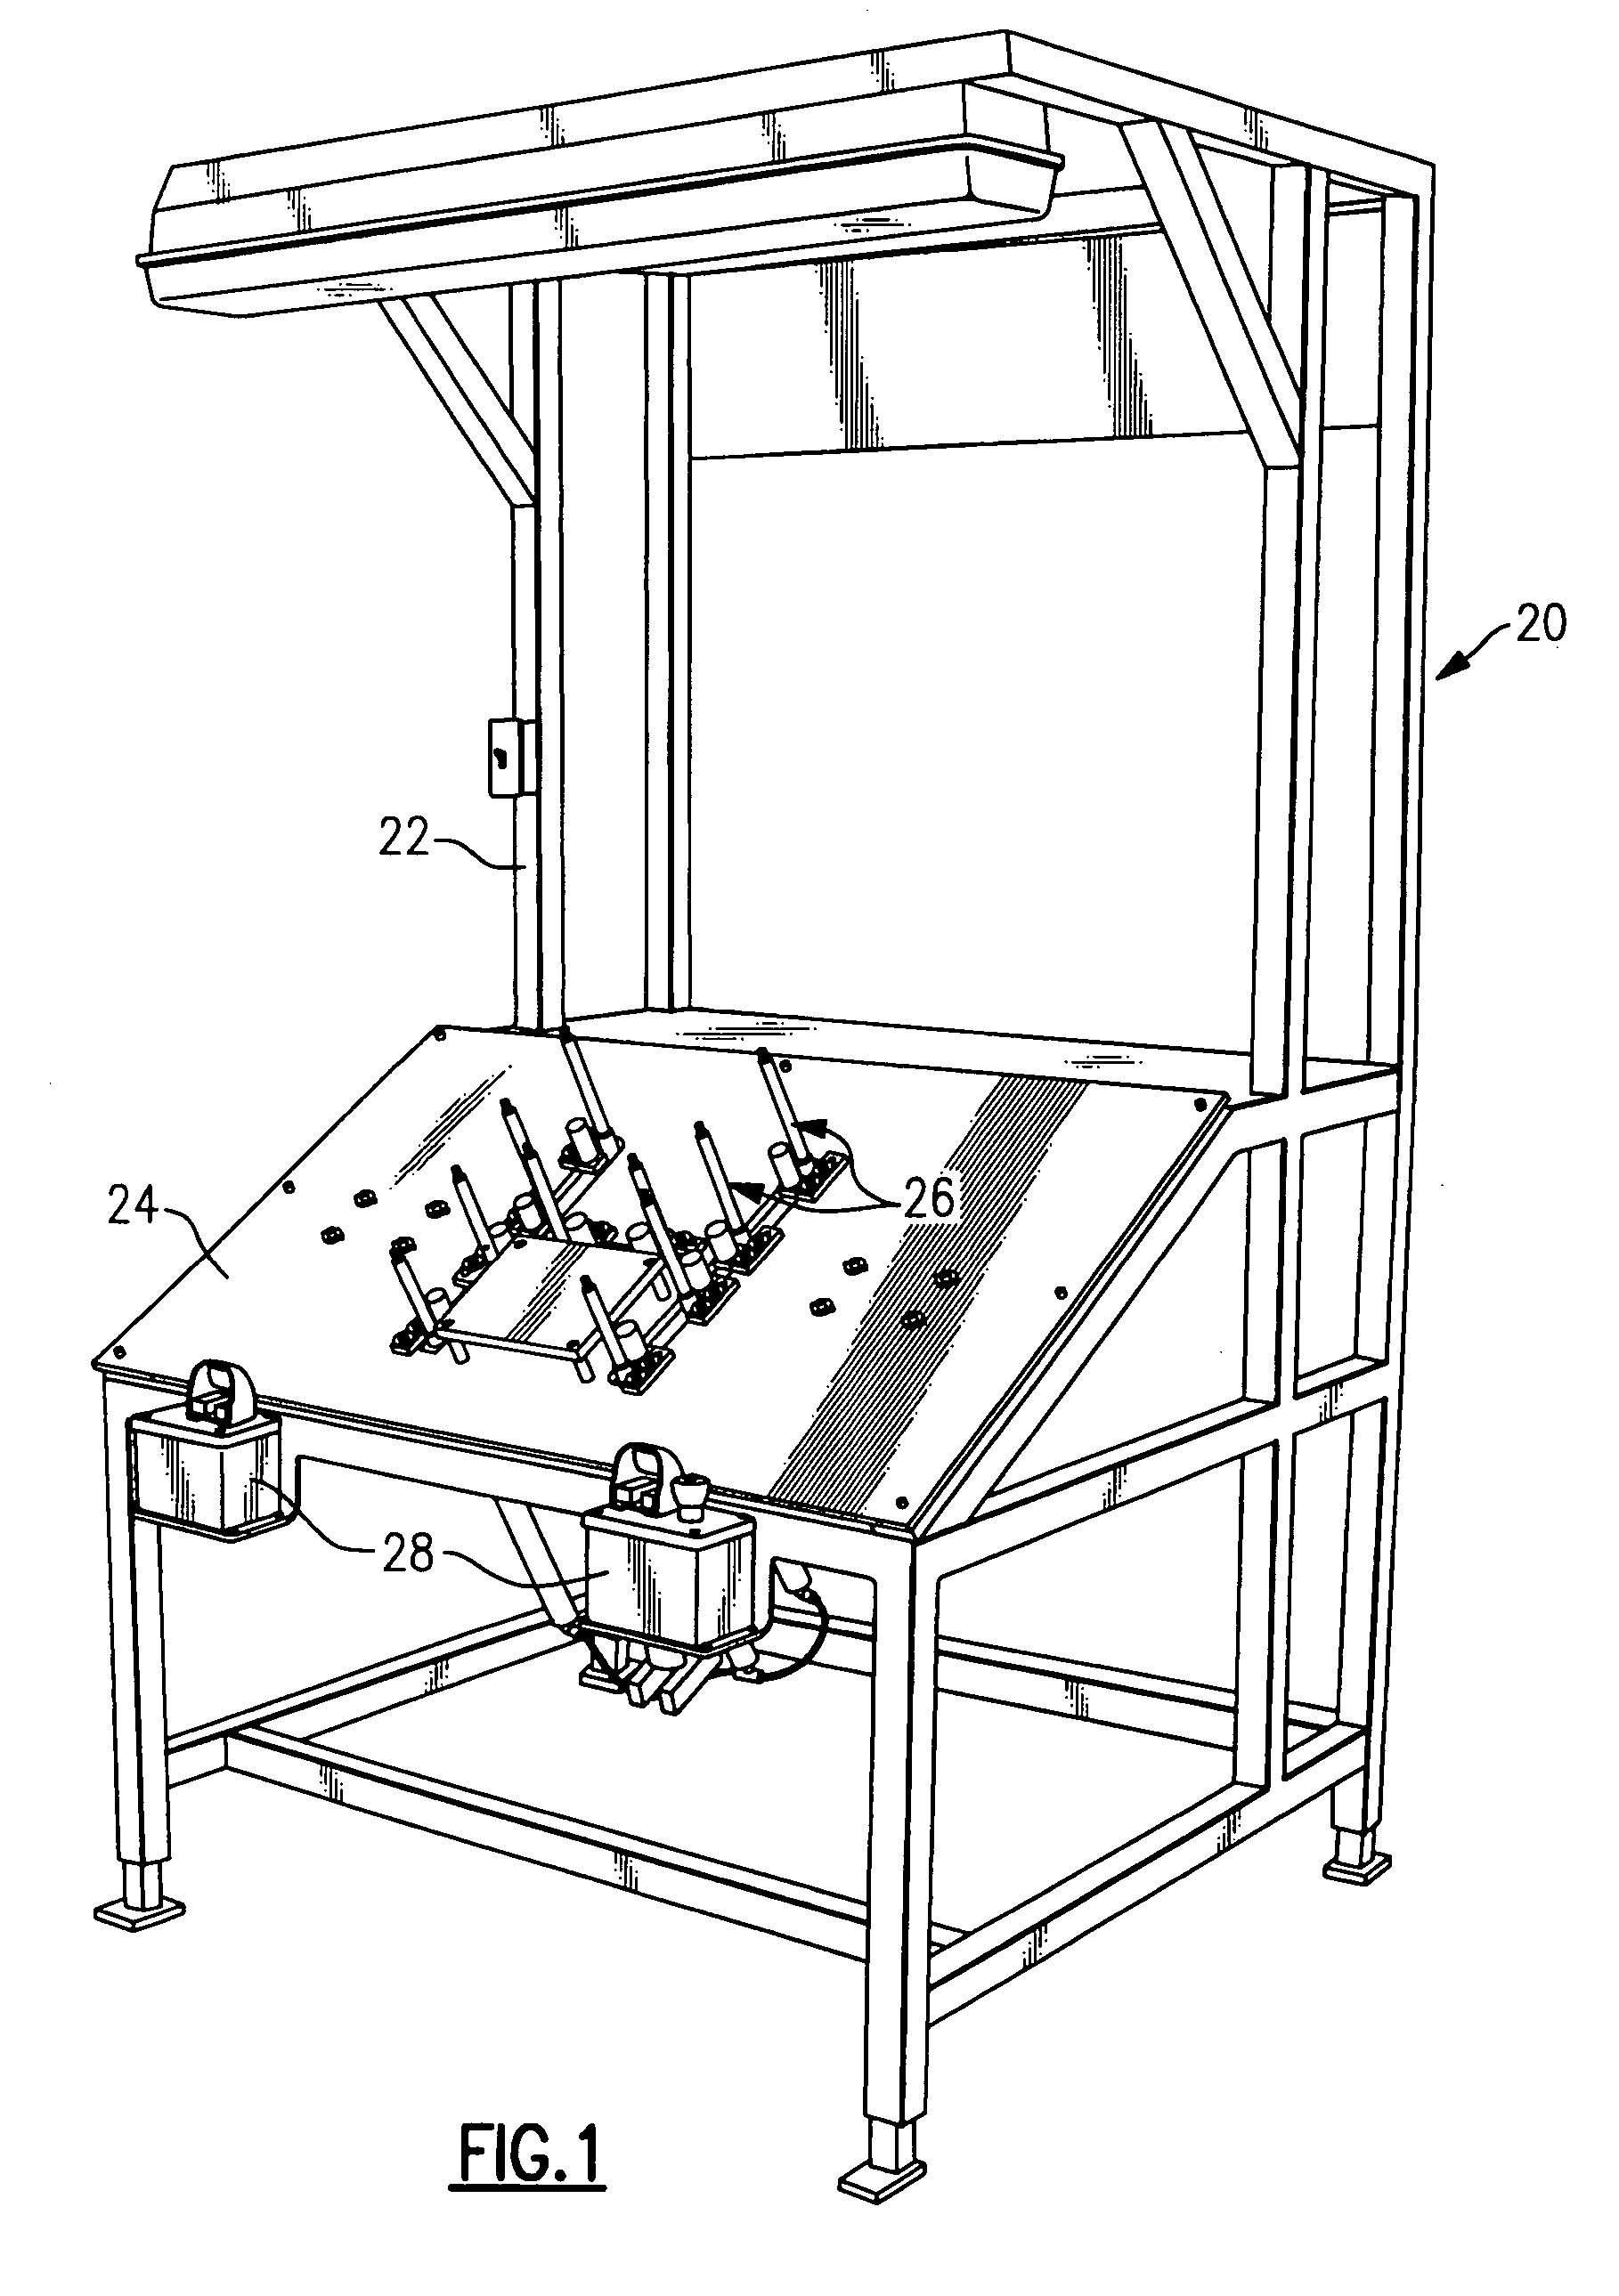 Device for securing trim to a seat